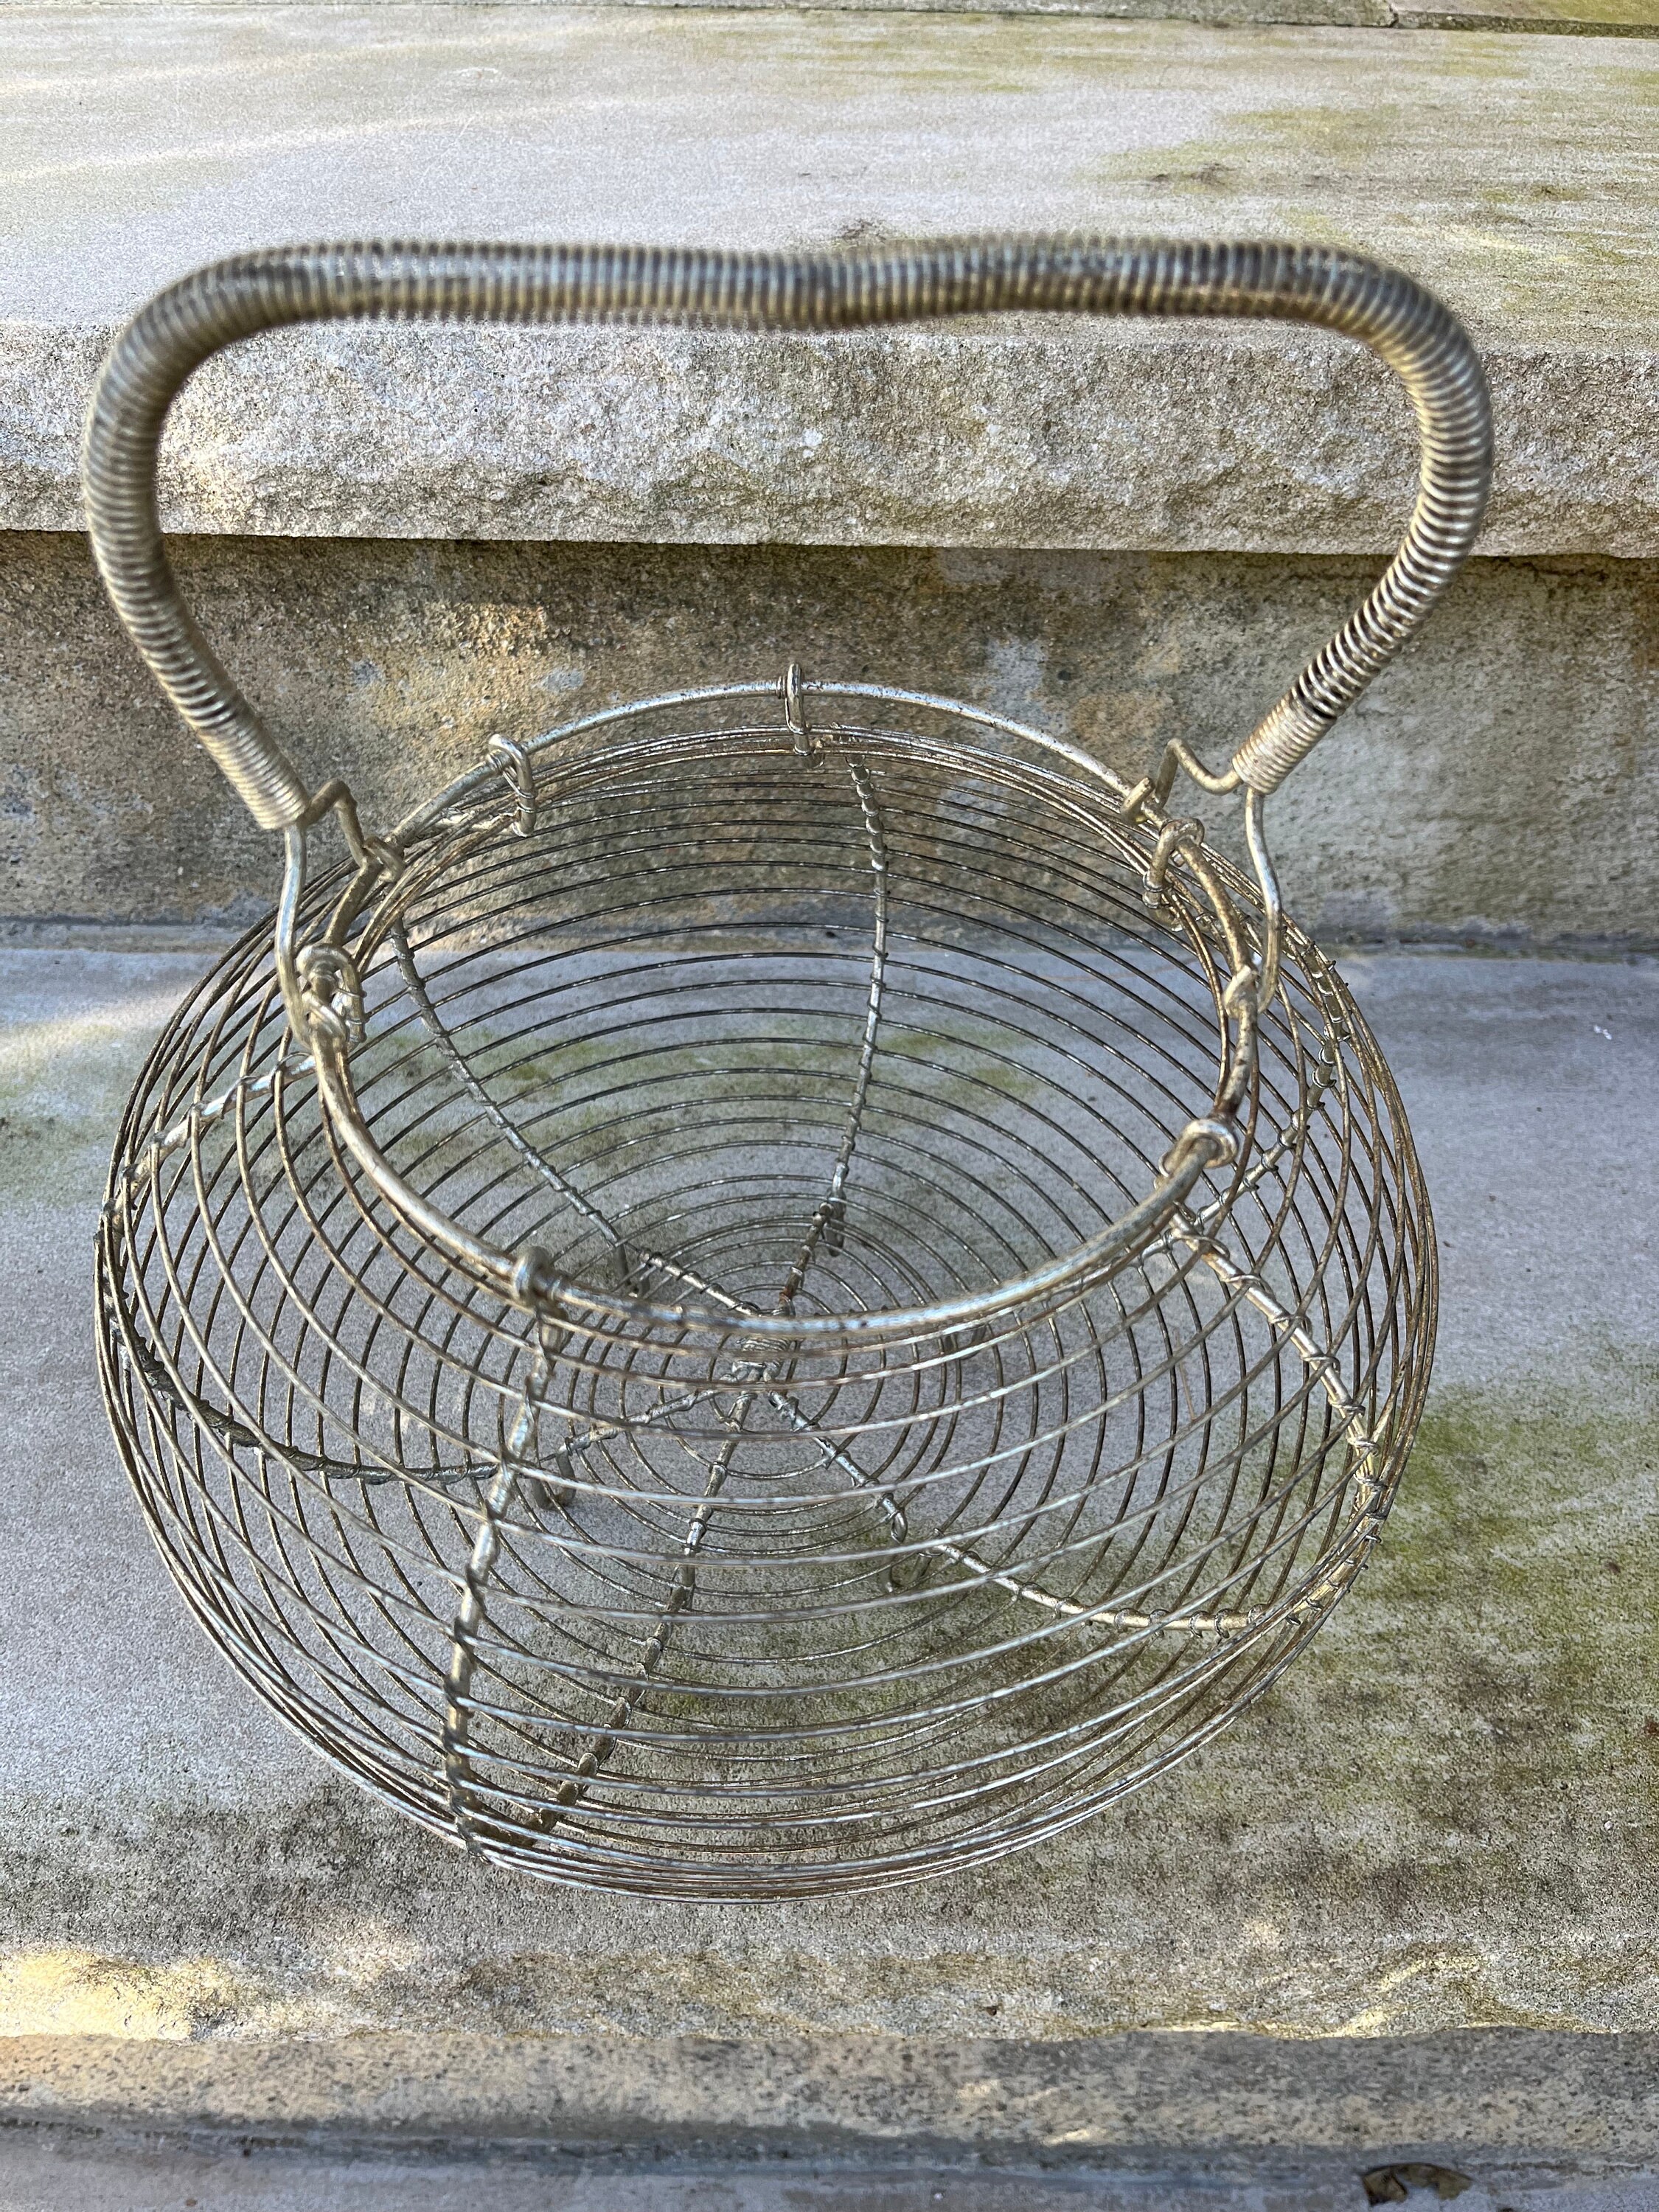  Farmhouse Metal Wire Egg Basket, 7.874.72in Egg